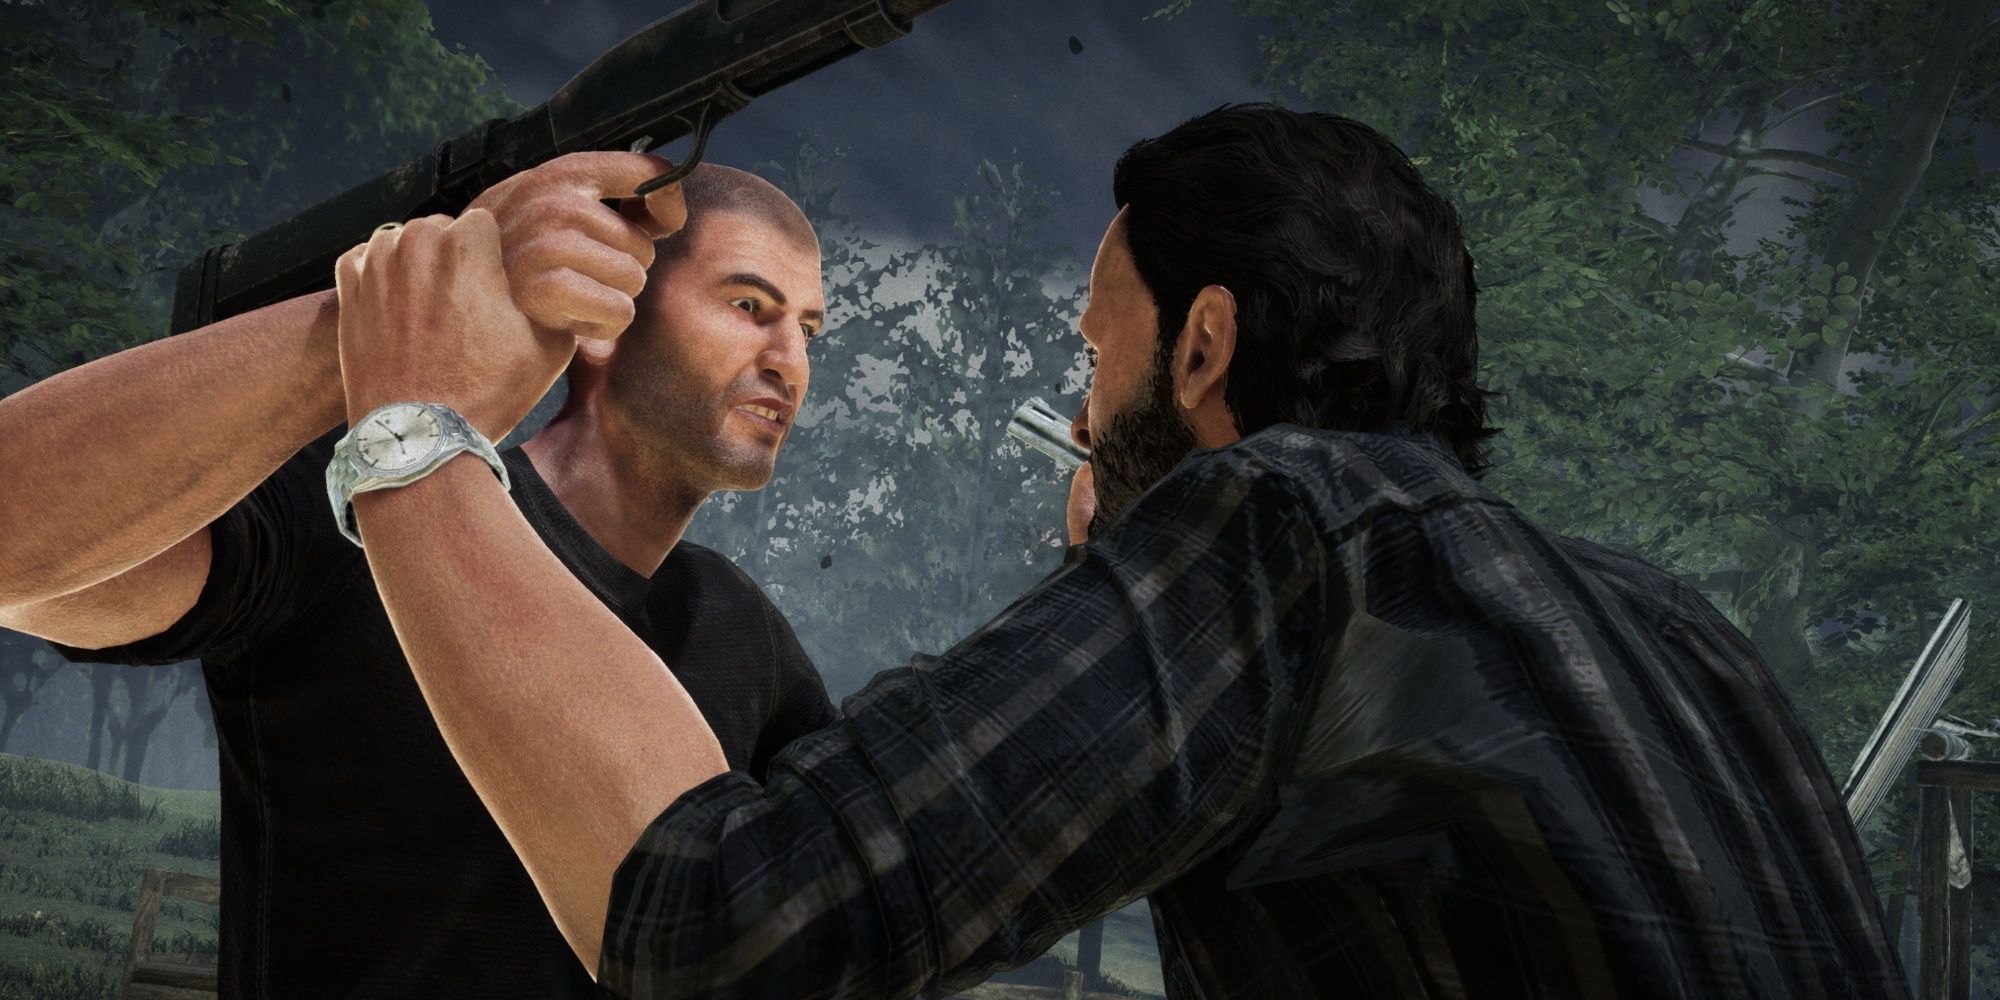 shane and rick fighting with guns